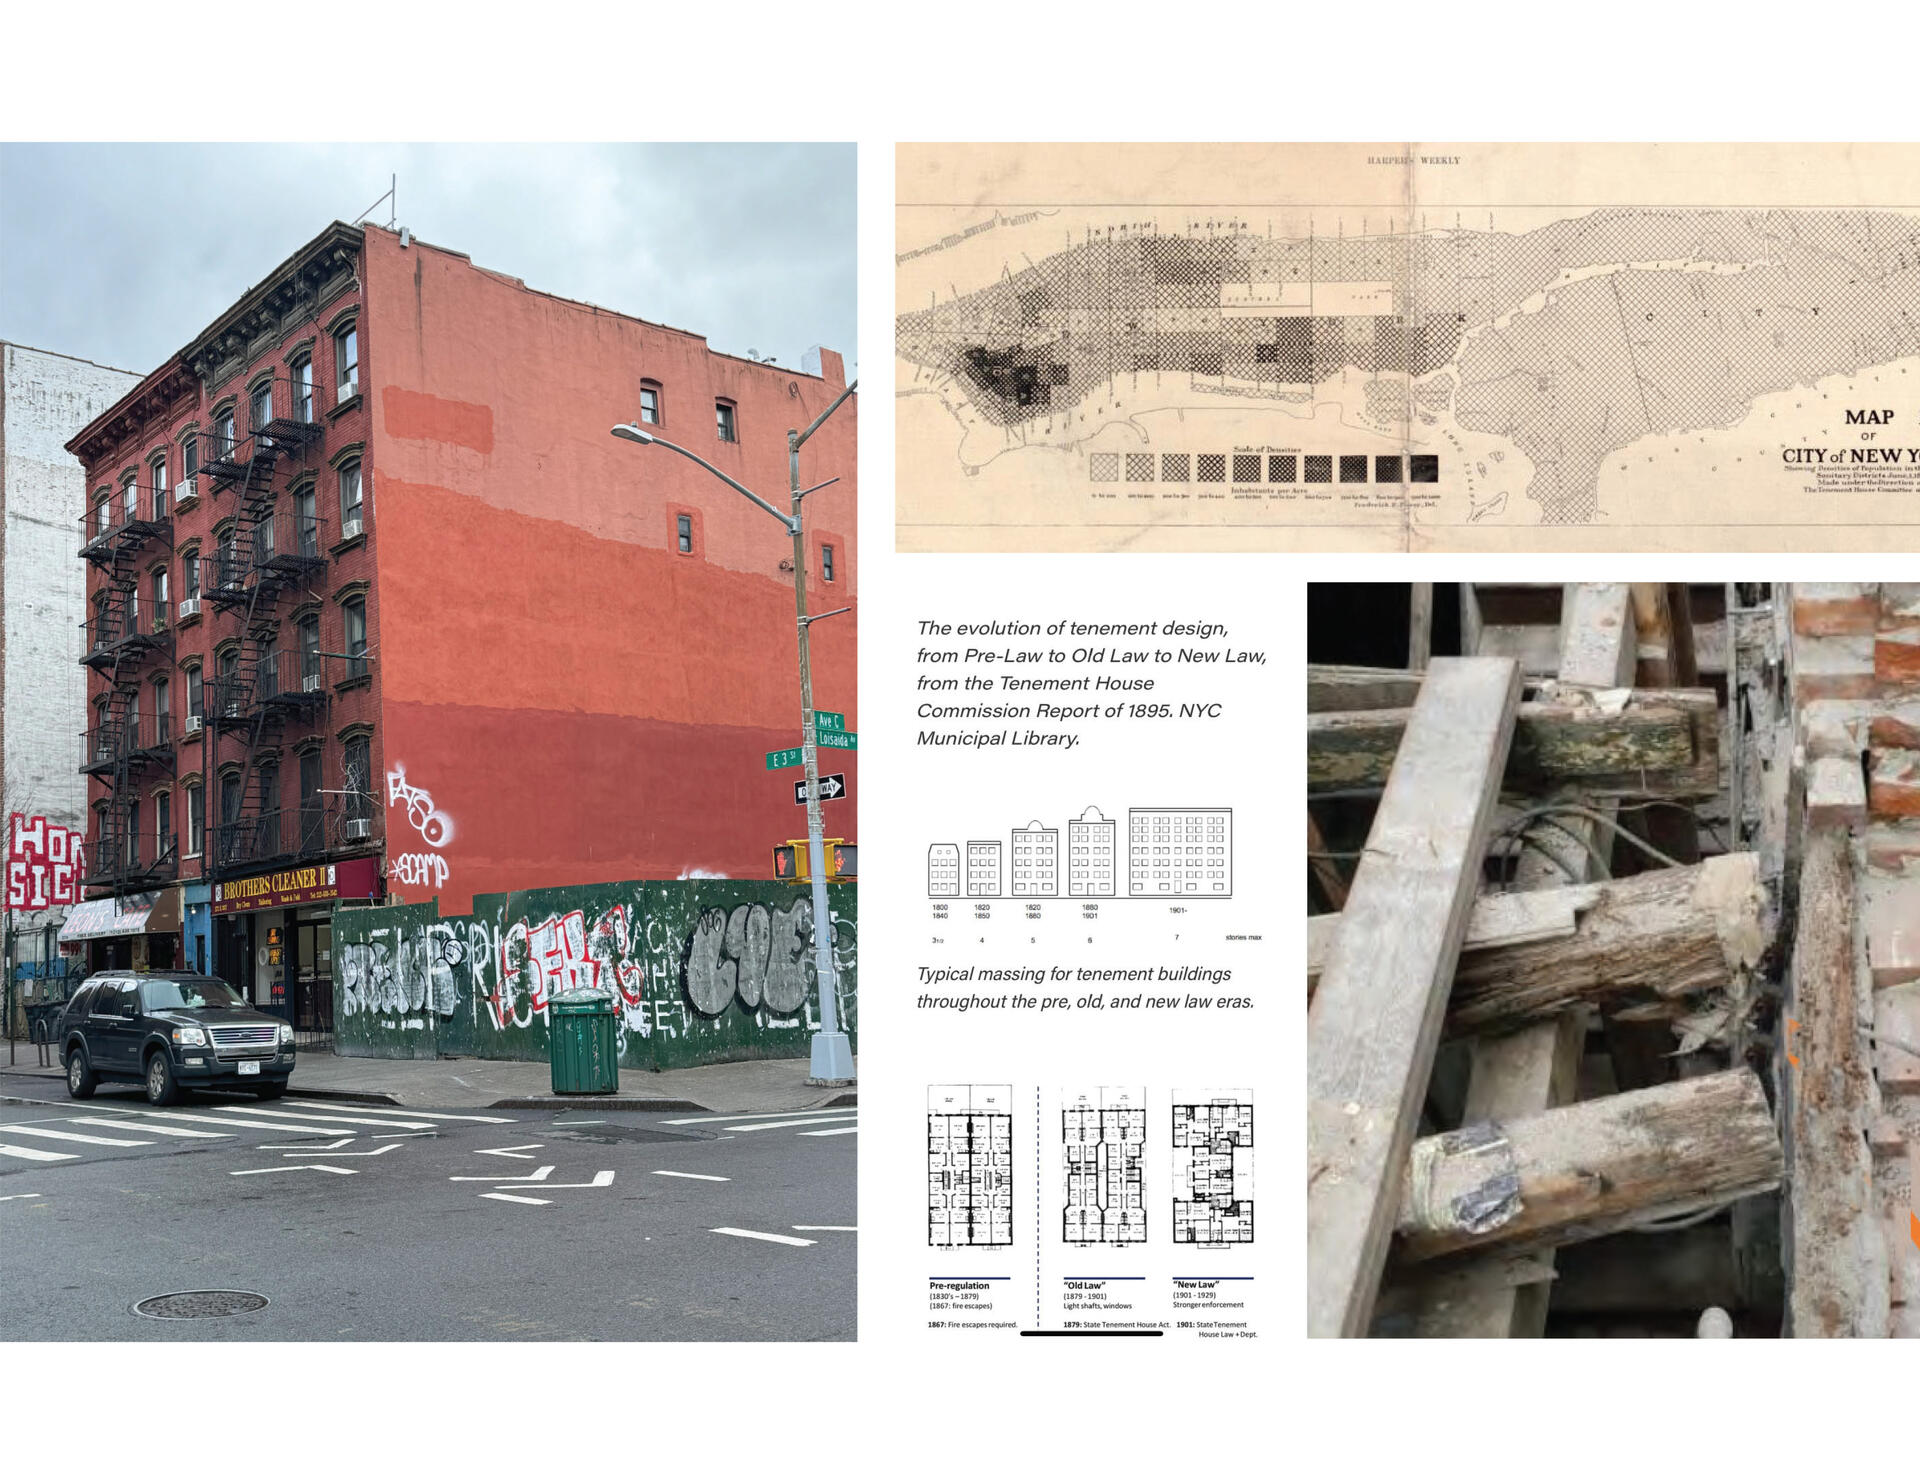 Image shows the typologies of tenement buildings on the Lower East Side and their common structural deficiencies.